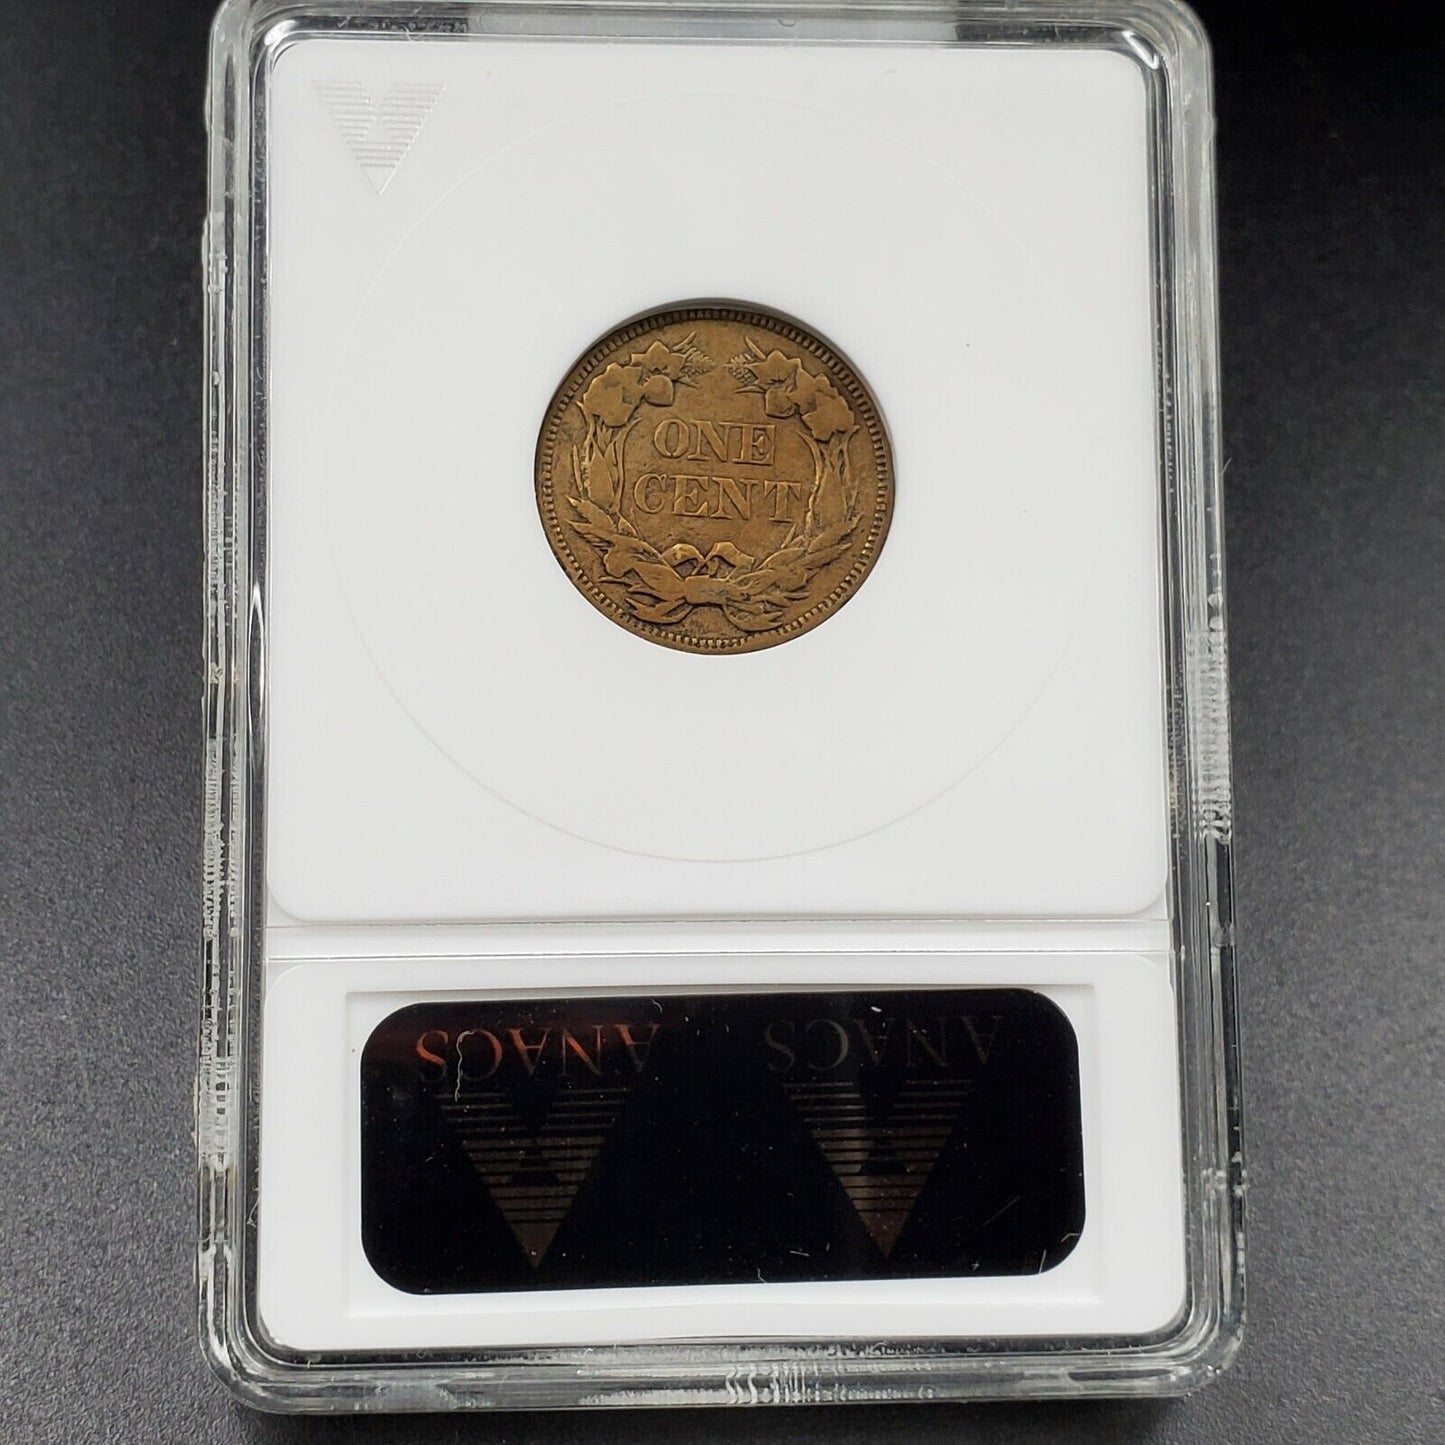 1857 Flying Eagle Cent Penny Error ANACS Clashed Dies FS-003 FS-402 VF Details